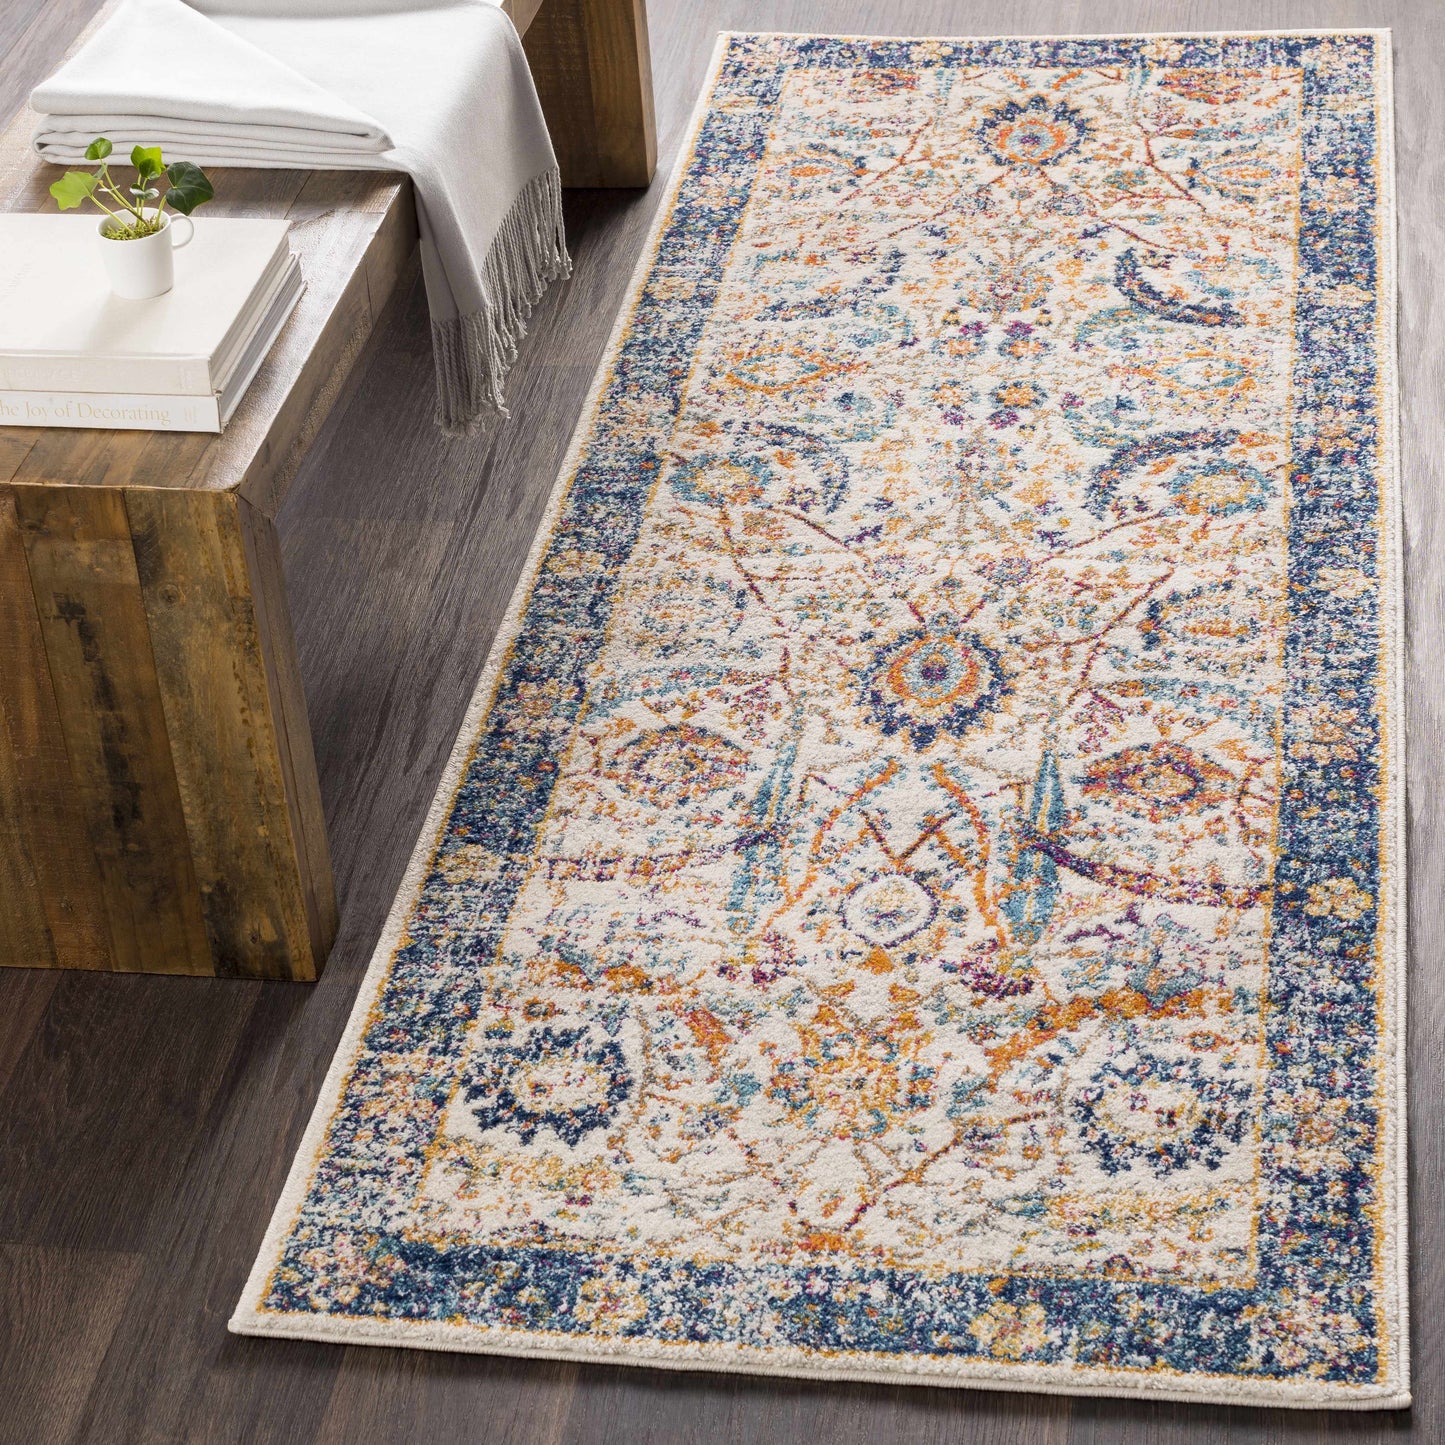 Boutique Rugs Rugs Smyrna Area Rug